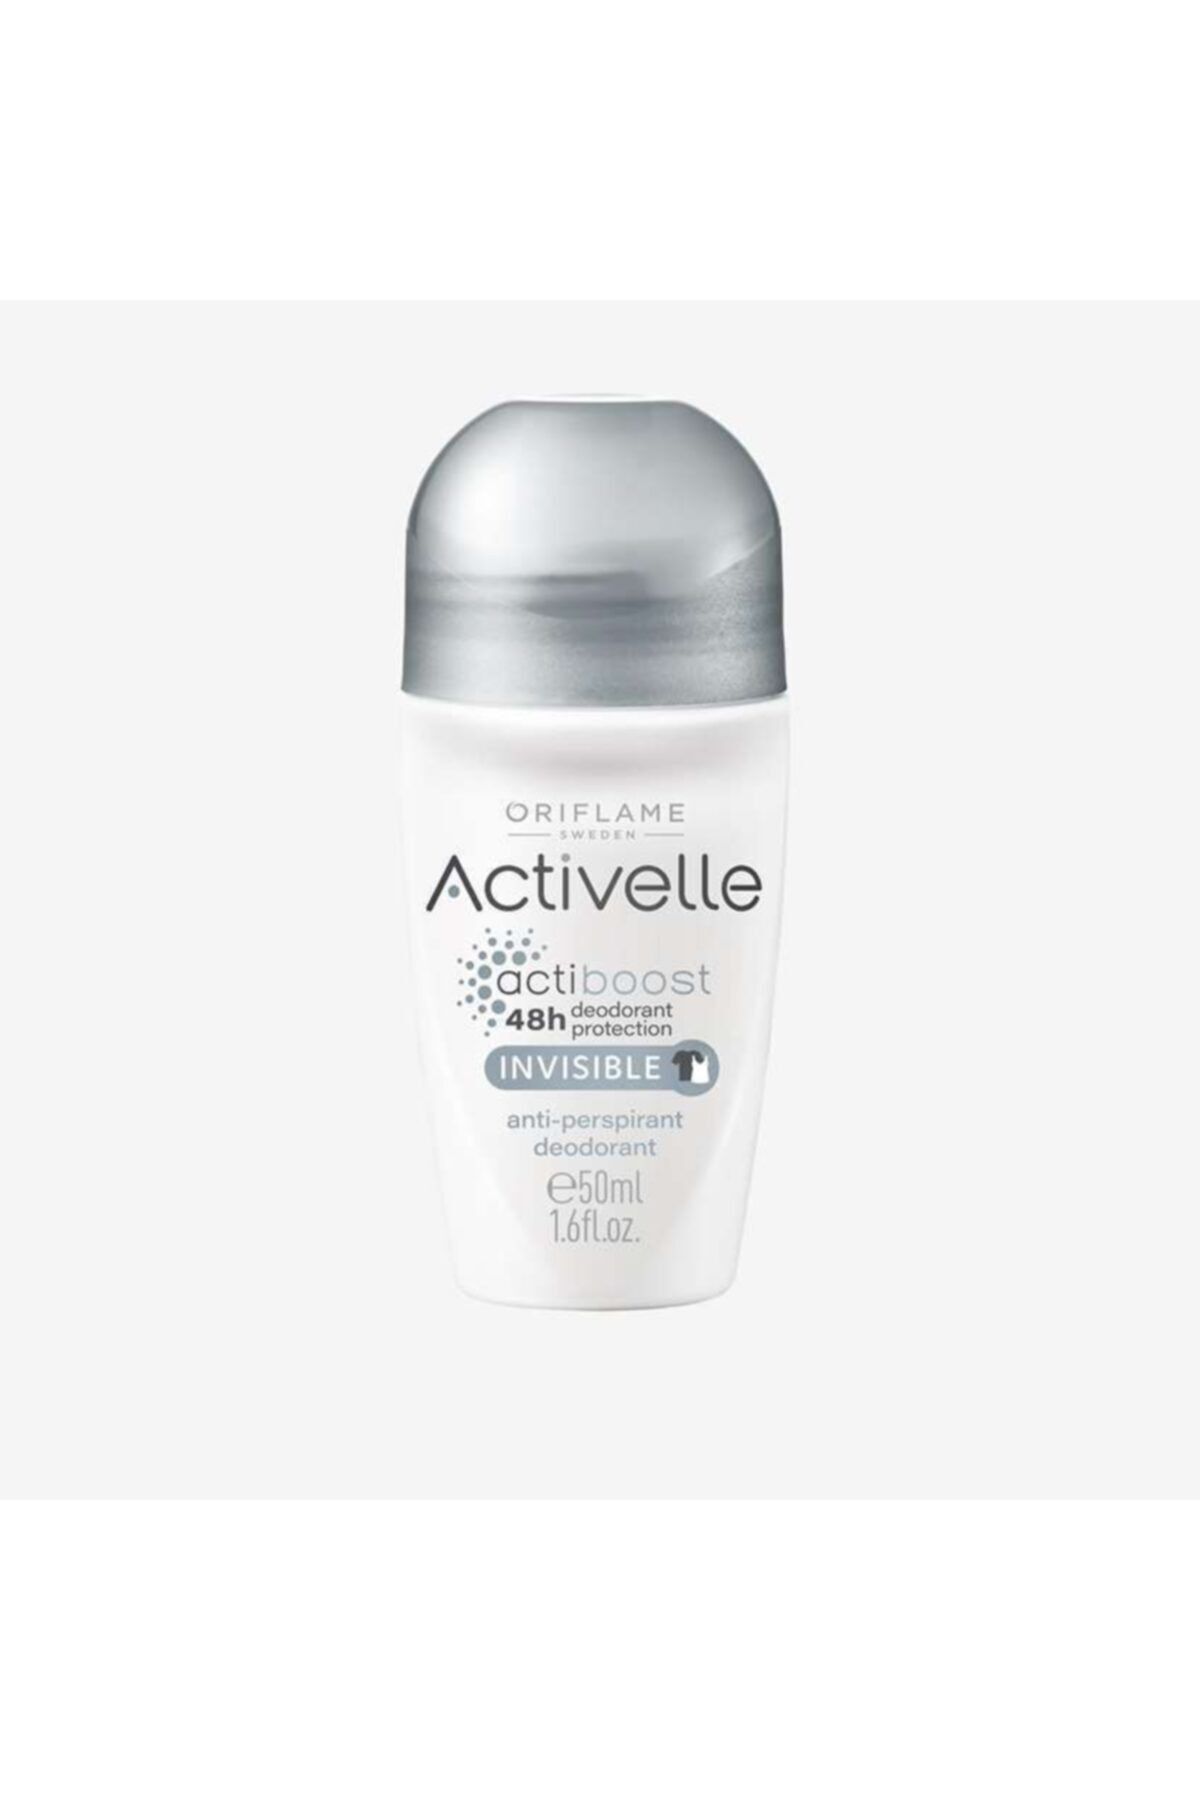 Oriflame Activelle Invisible Anti-perspirant Roll-on 50 Ml - Roll-on 50 Ml 33141